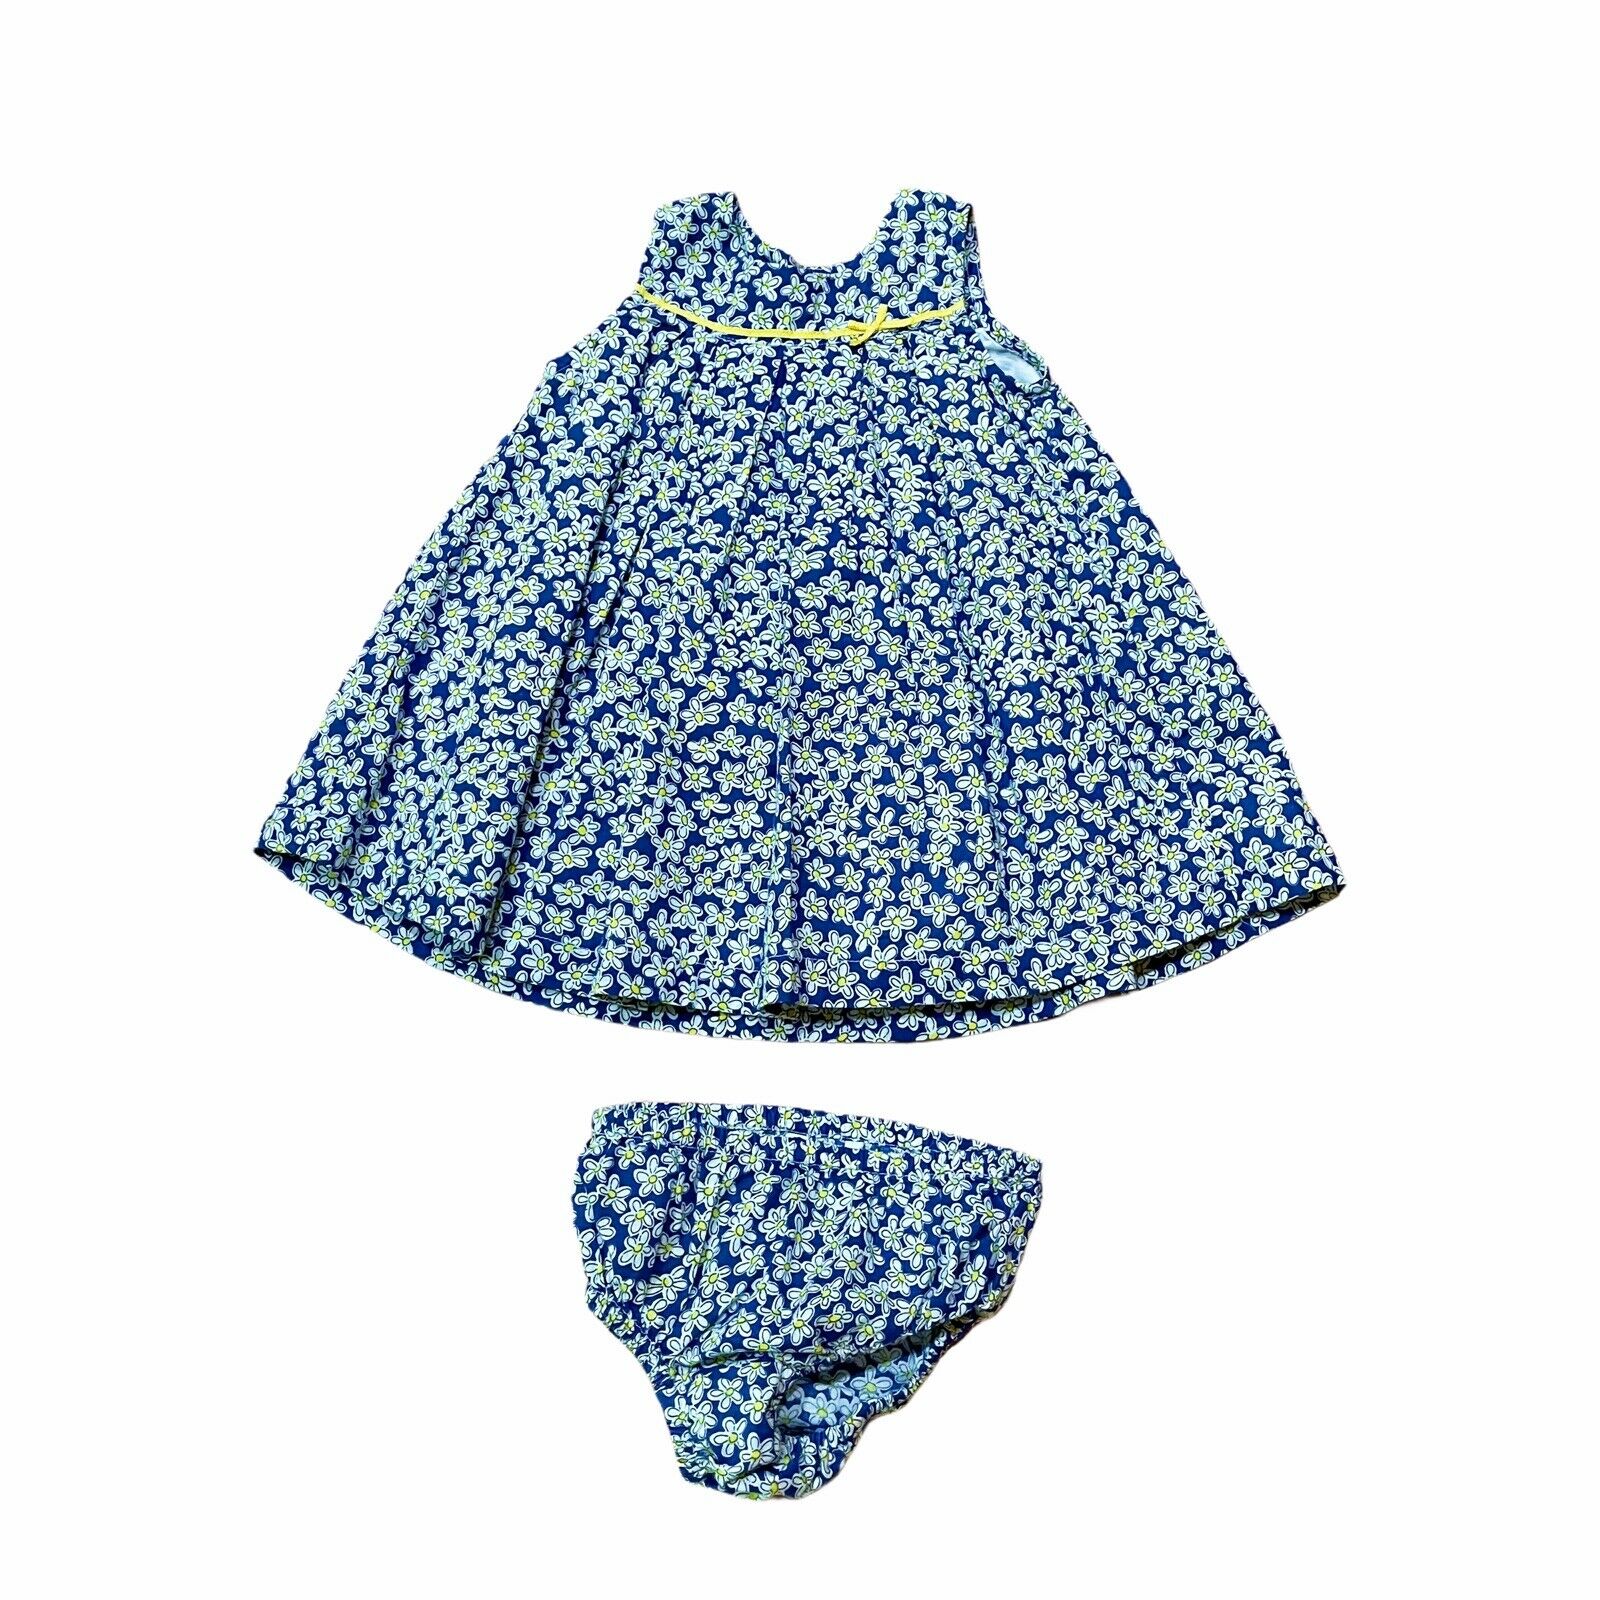 Baby Boden Summer Dress With Matching Bloomers Size 3-6 Months Blue White Flower